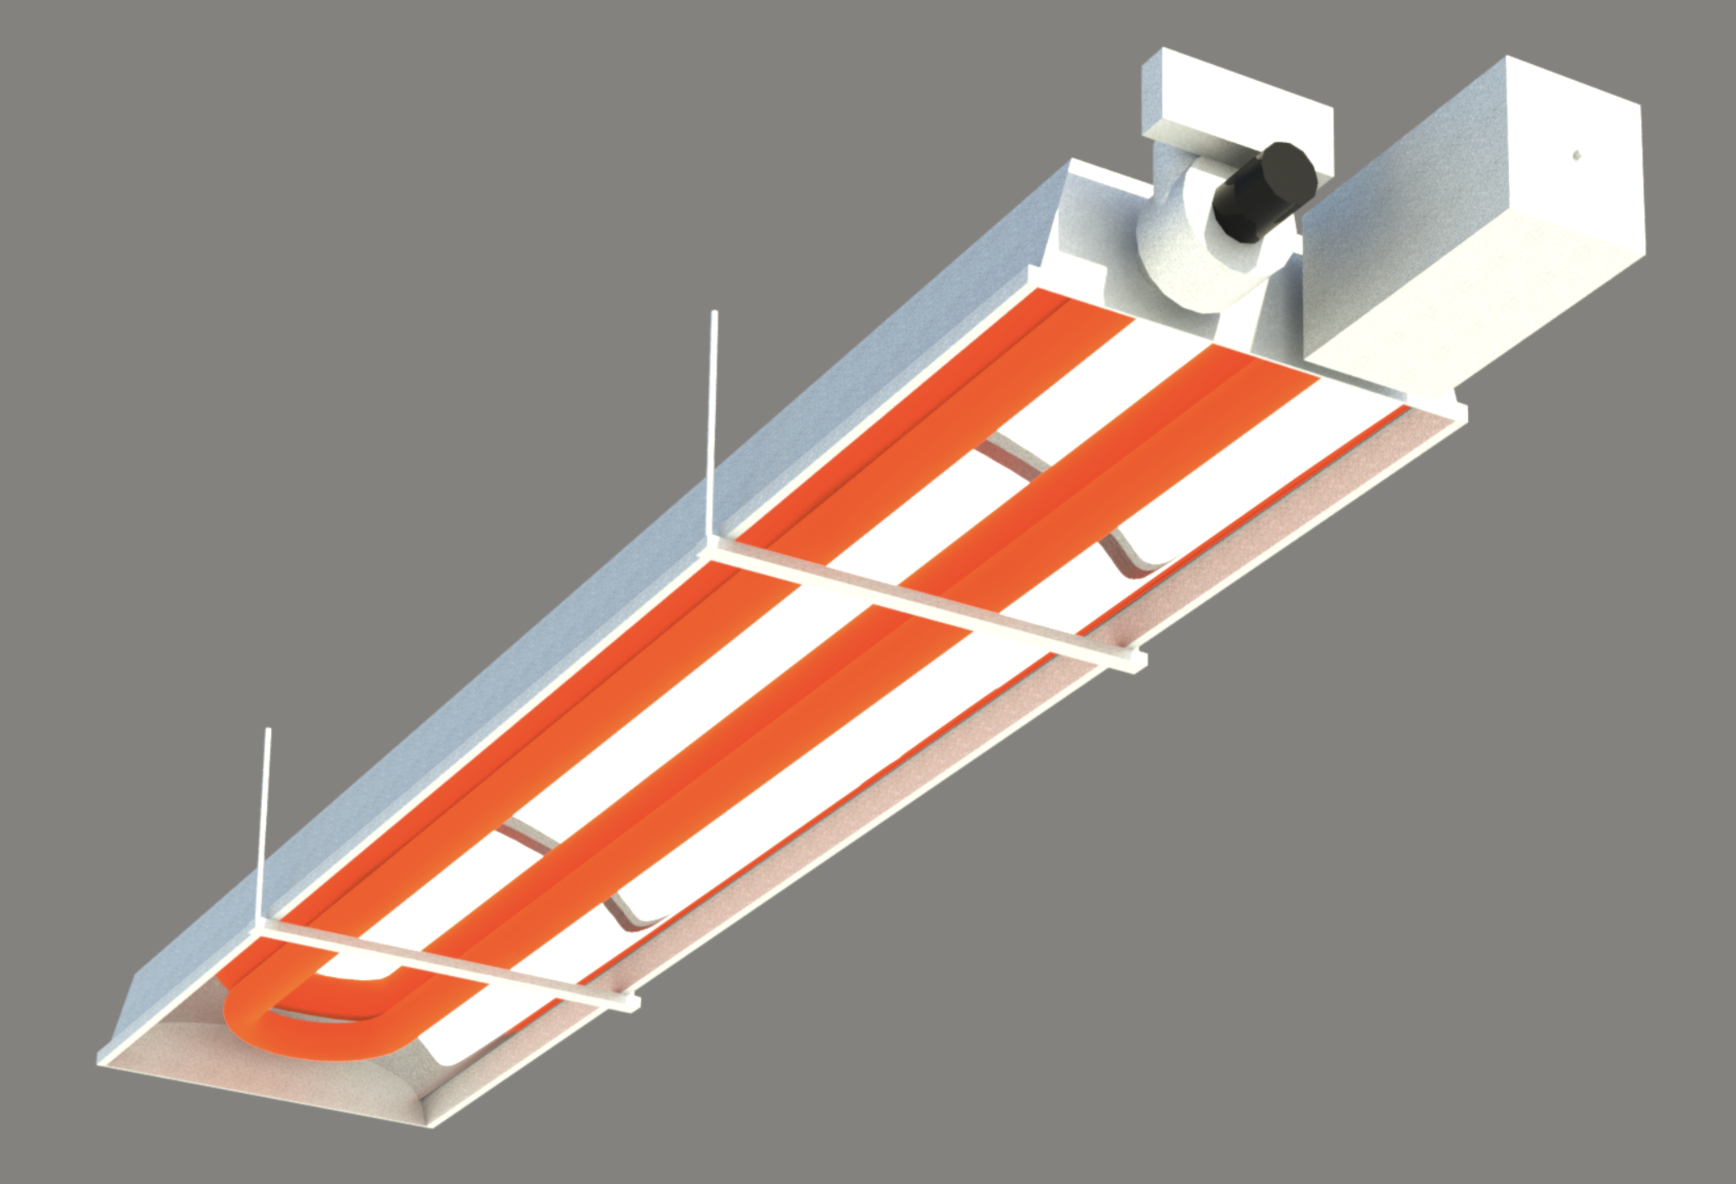 Render of the U-Shaped radiant tube heater from manufacturer Space-Ray. The tube is made of metal and emits infrared radiation